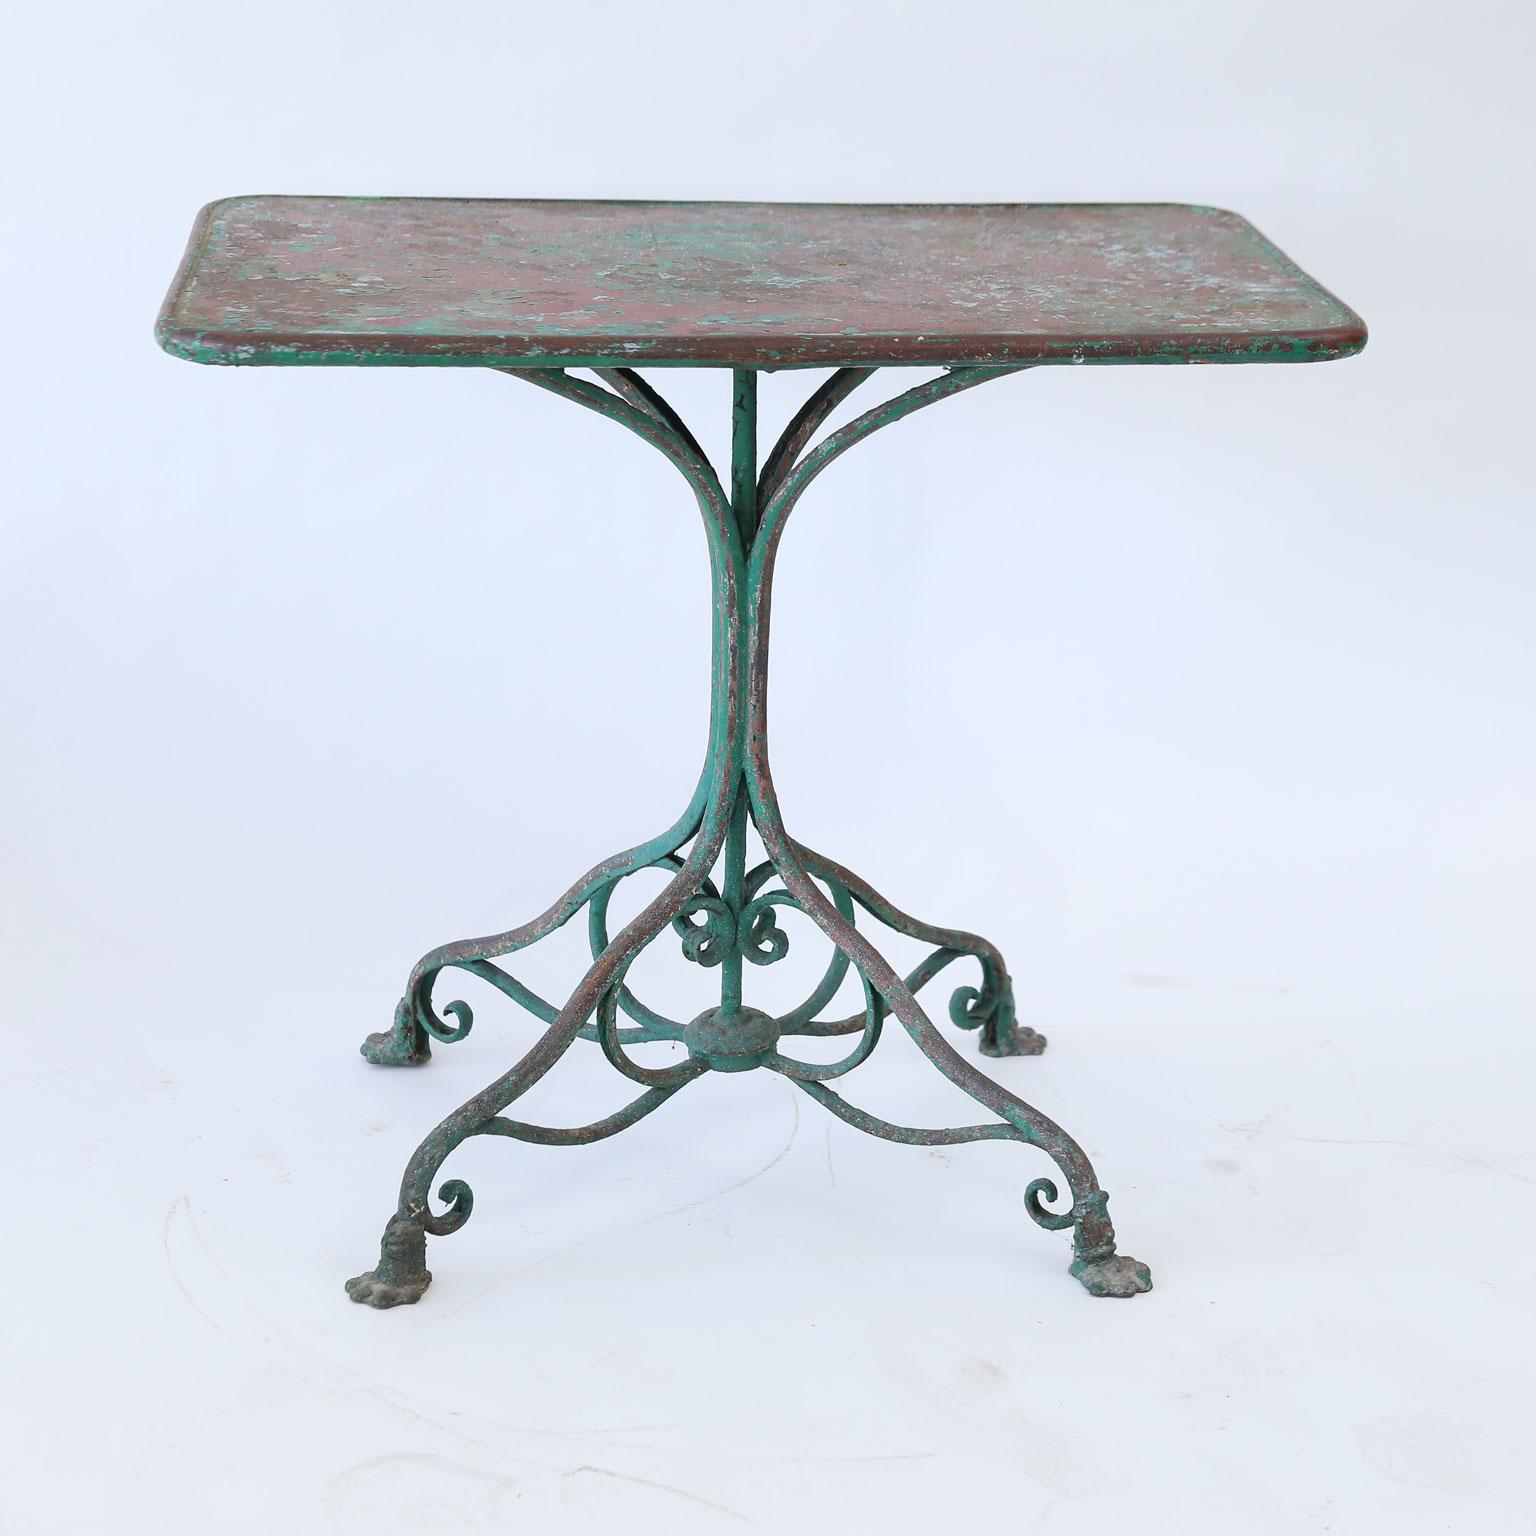 Arras iron garden table, circa 1900-1920, rectangular top raised upon a slender pedestal comprised of four round iron bars that gracefully radiate out to form a quadriped base, decorated with scrolled iron embellishments and supported by four iron